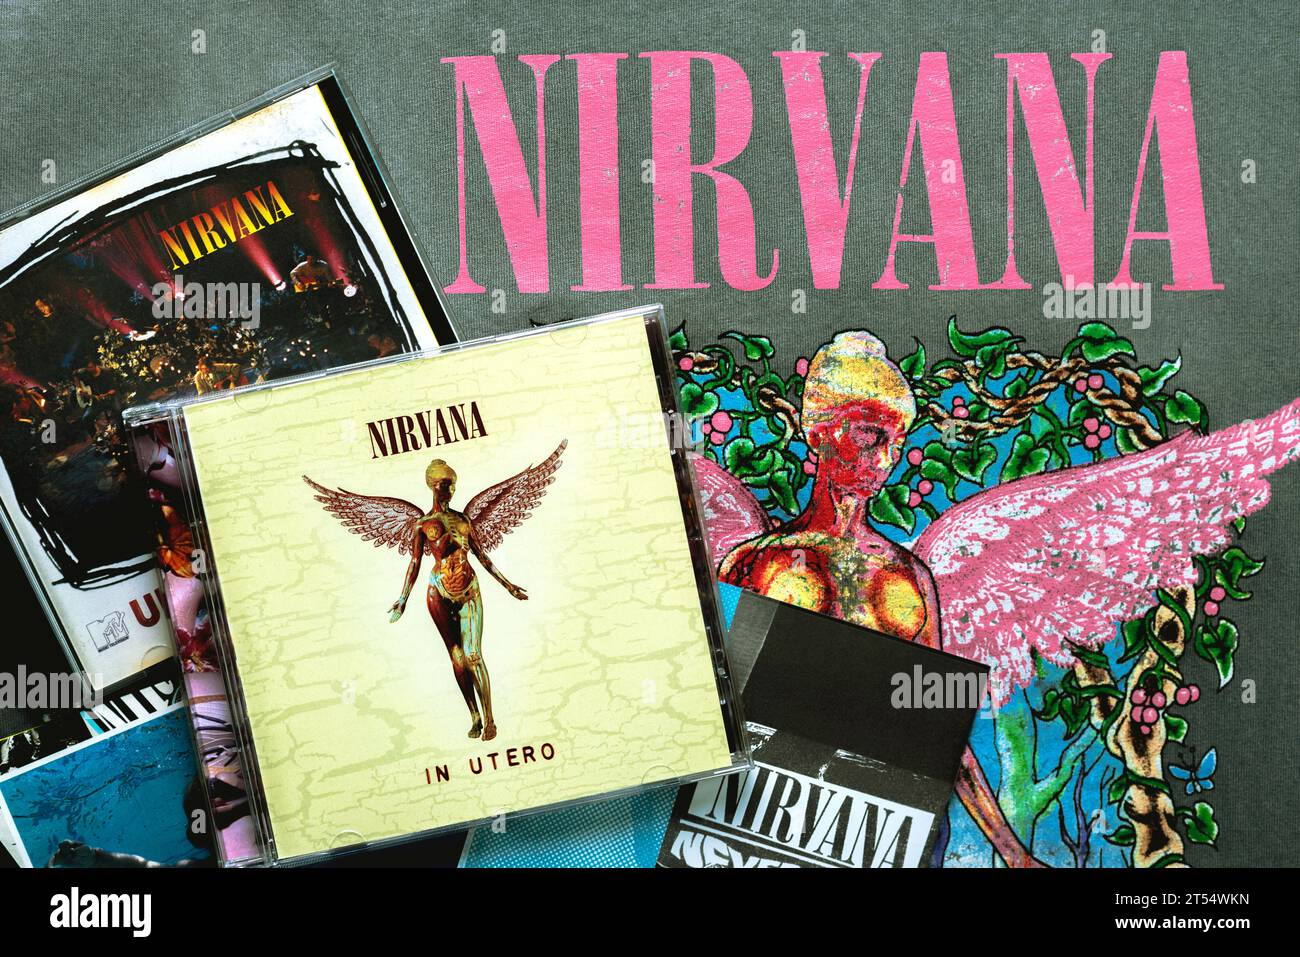 CDs of the american alternative rock group Nirvana over on a T-shirt with Nirvana logo. Illustrative editorial Stock Photo